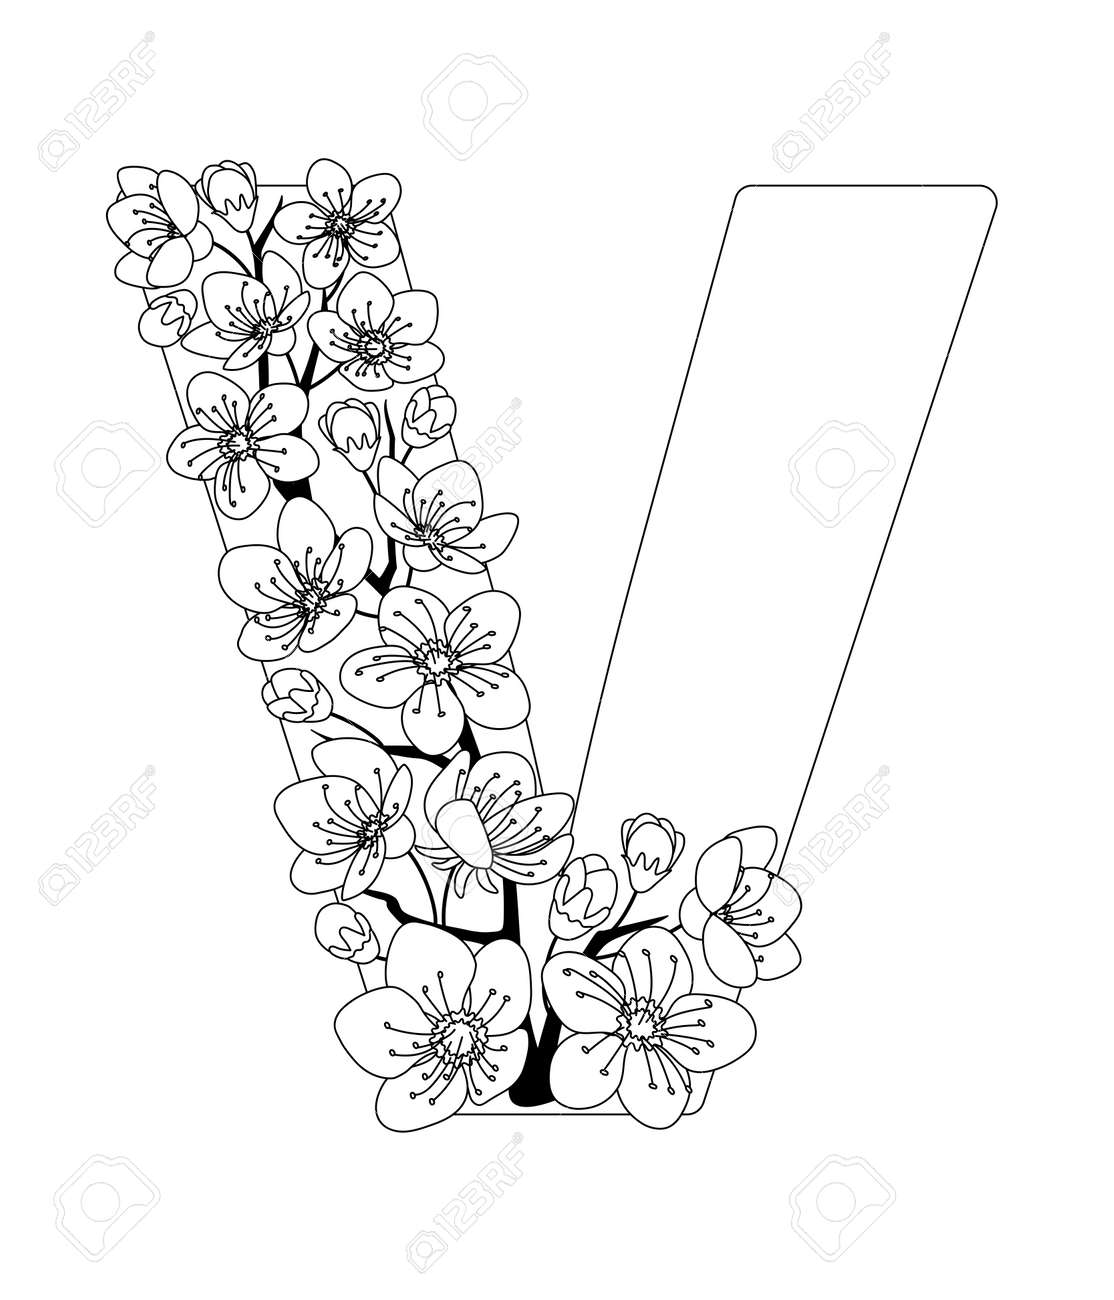 Capital letter v patterned with contour hand drawn doodle blossom cherry monochrome page anti stress adult coloring book royalty free svg cliparts vectors and stock illustration image